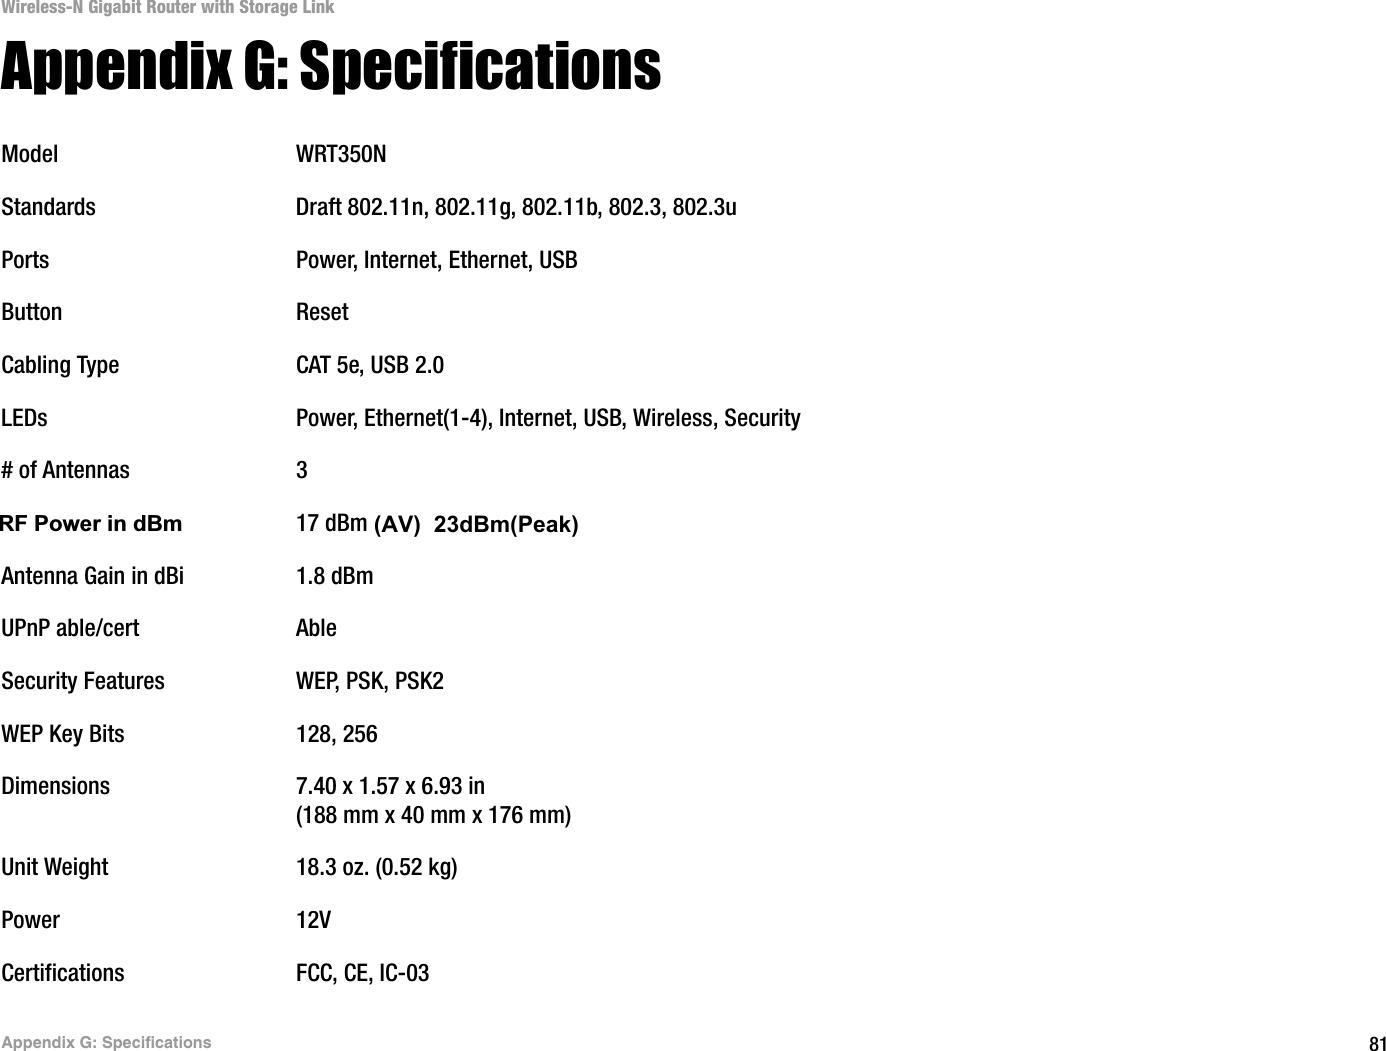 81Appendix G: SpecificationsWireless-N Gigabit Router with Storage LinkAppendix G: SpecificationsModel WRT350NStandards Draft 802.11n, 802.11g, 802.11b, 802.3, 802.3uPorts Power, Internet, Ethernet, USBButton ResetCabling Type CAT 5e, USB 2.0LEDs Power, Ethernet(1-4), Internet, USB, Wireless, Security# of Antennas 3RF Pwr (EIRP) in dBm 17 dBmAntenna Gain in dBi 1.8 dBmUPnP able/cert AbleSecurity Features WEP, PSK, PSK2WEP Key Bits 128, 256Dimensions 7.40 x 1.57 x 6.93 in(188 mm x 40 mm x 176 mm)Unit Weight 18.3 oz. (0.52 kg)Power 12VCertifications FCC, CE, IC-03RF Power in dBm(AV)  23dBm(Peak)